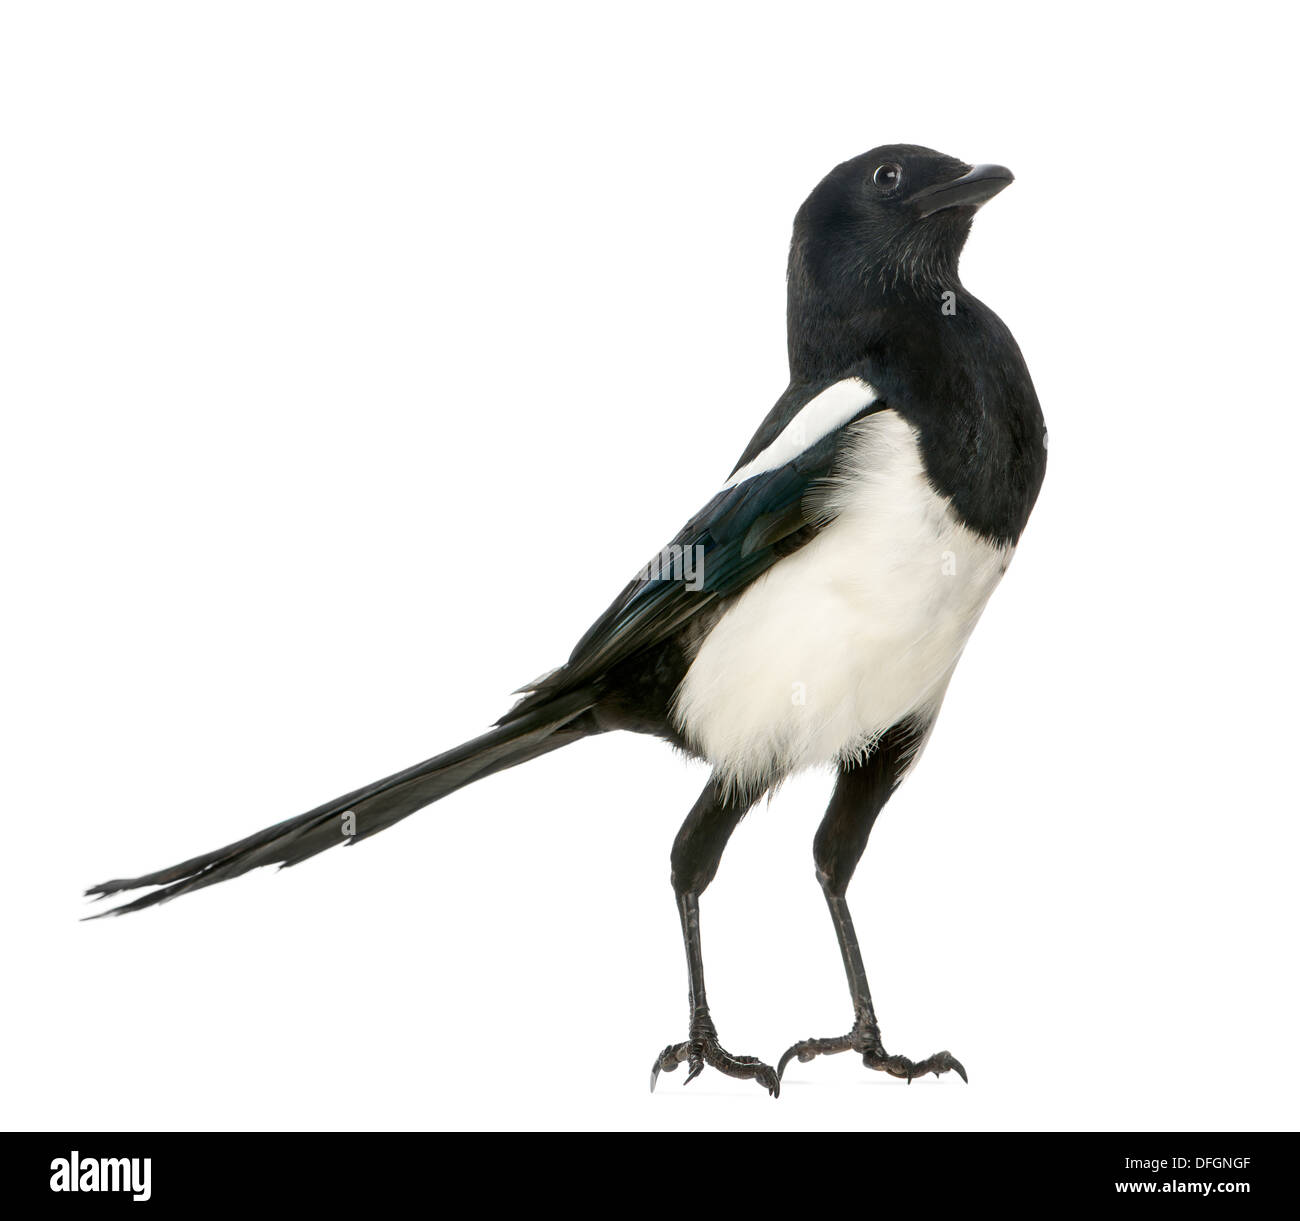 Common Magpie upright looking up, Pica pica, against white background Stock Photo